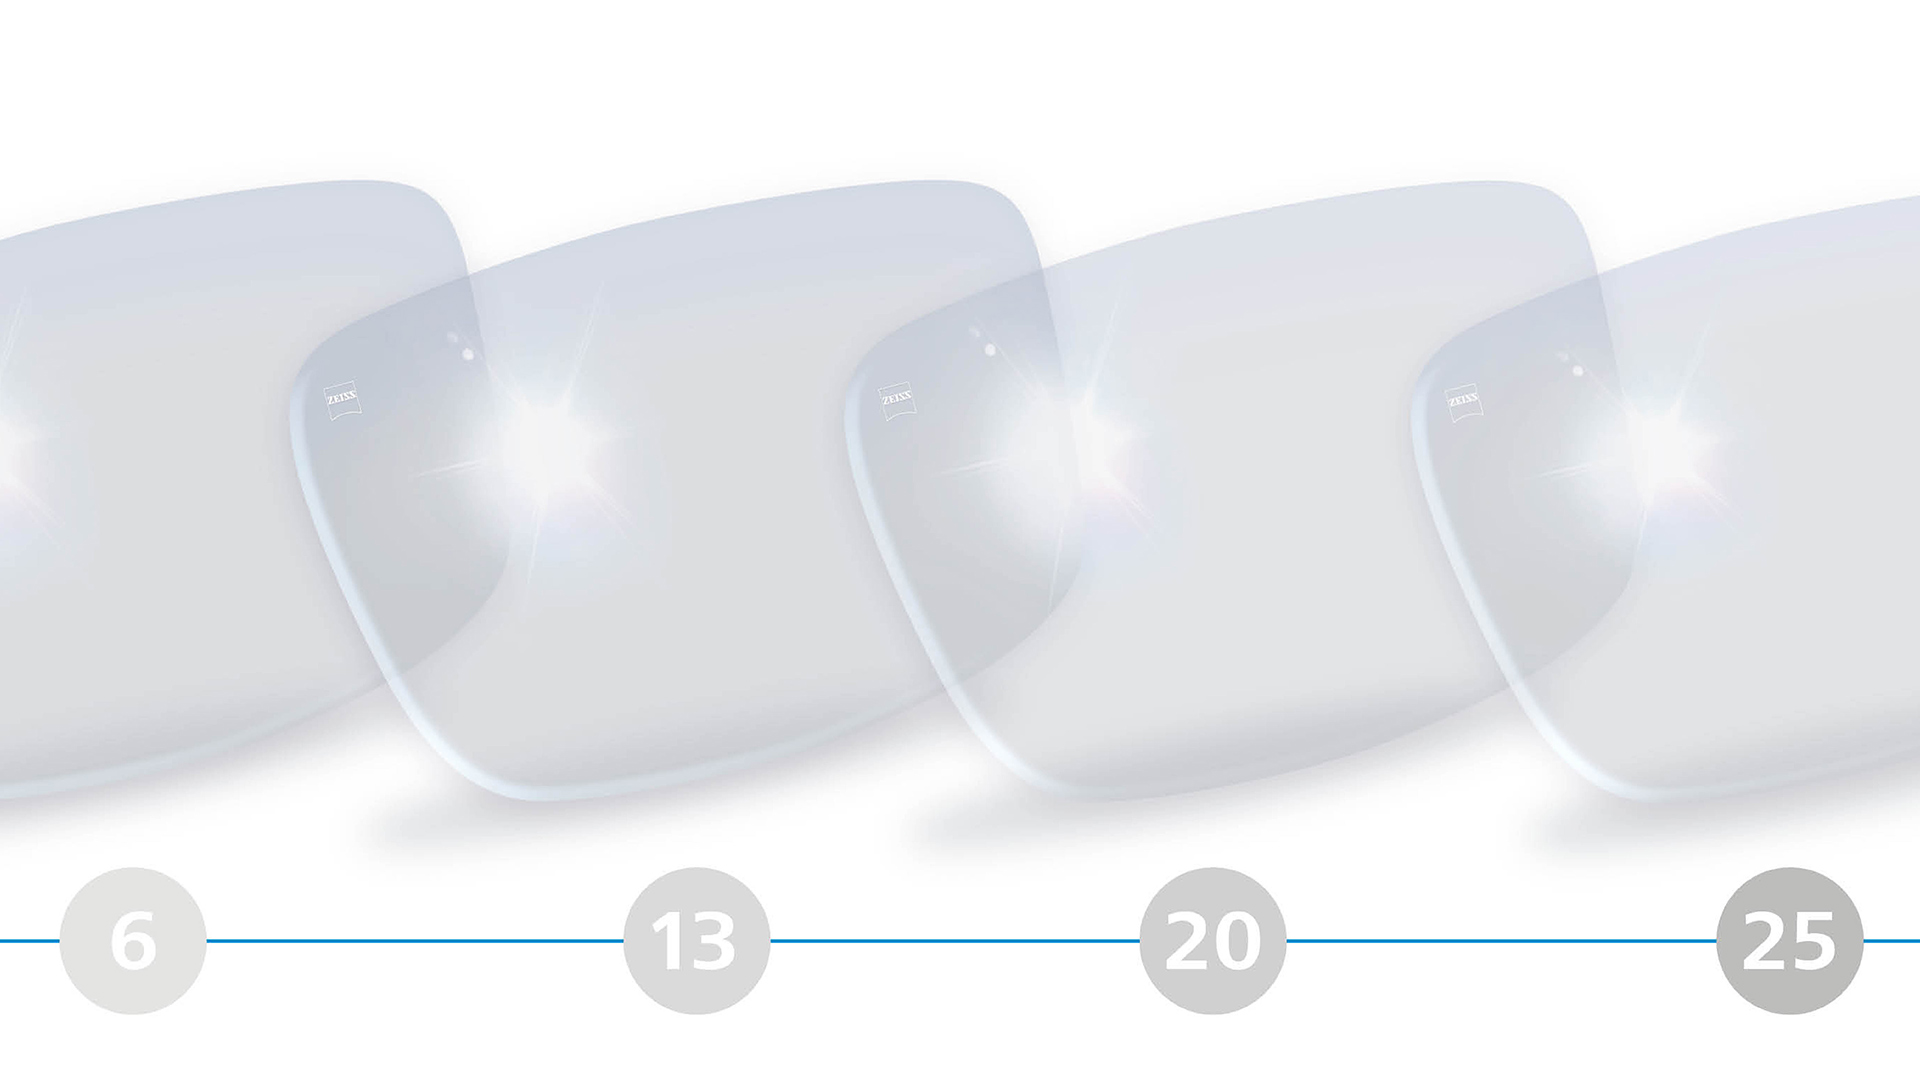 3D illustration of single vision lenses for the ages 6 to 25 years.